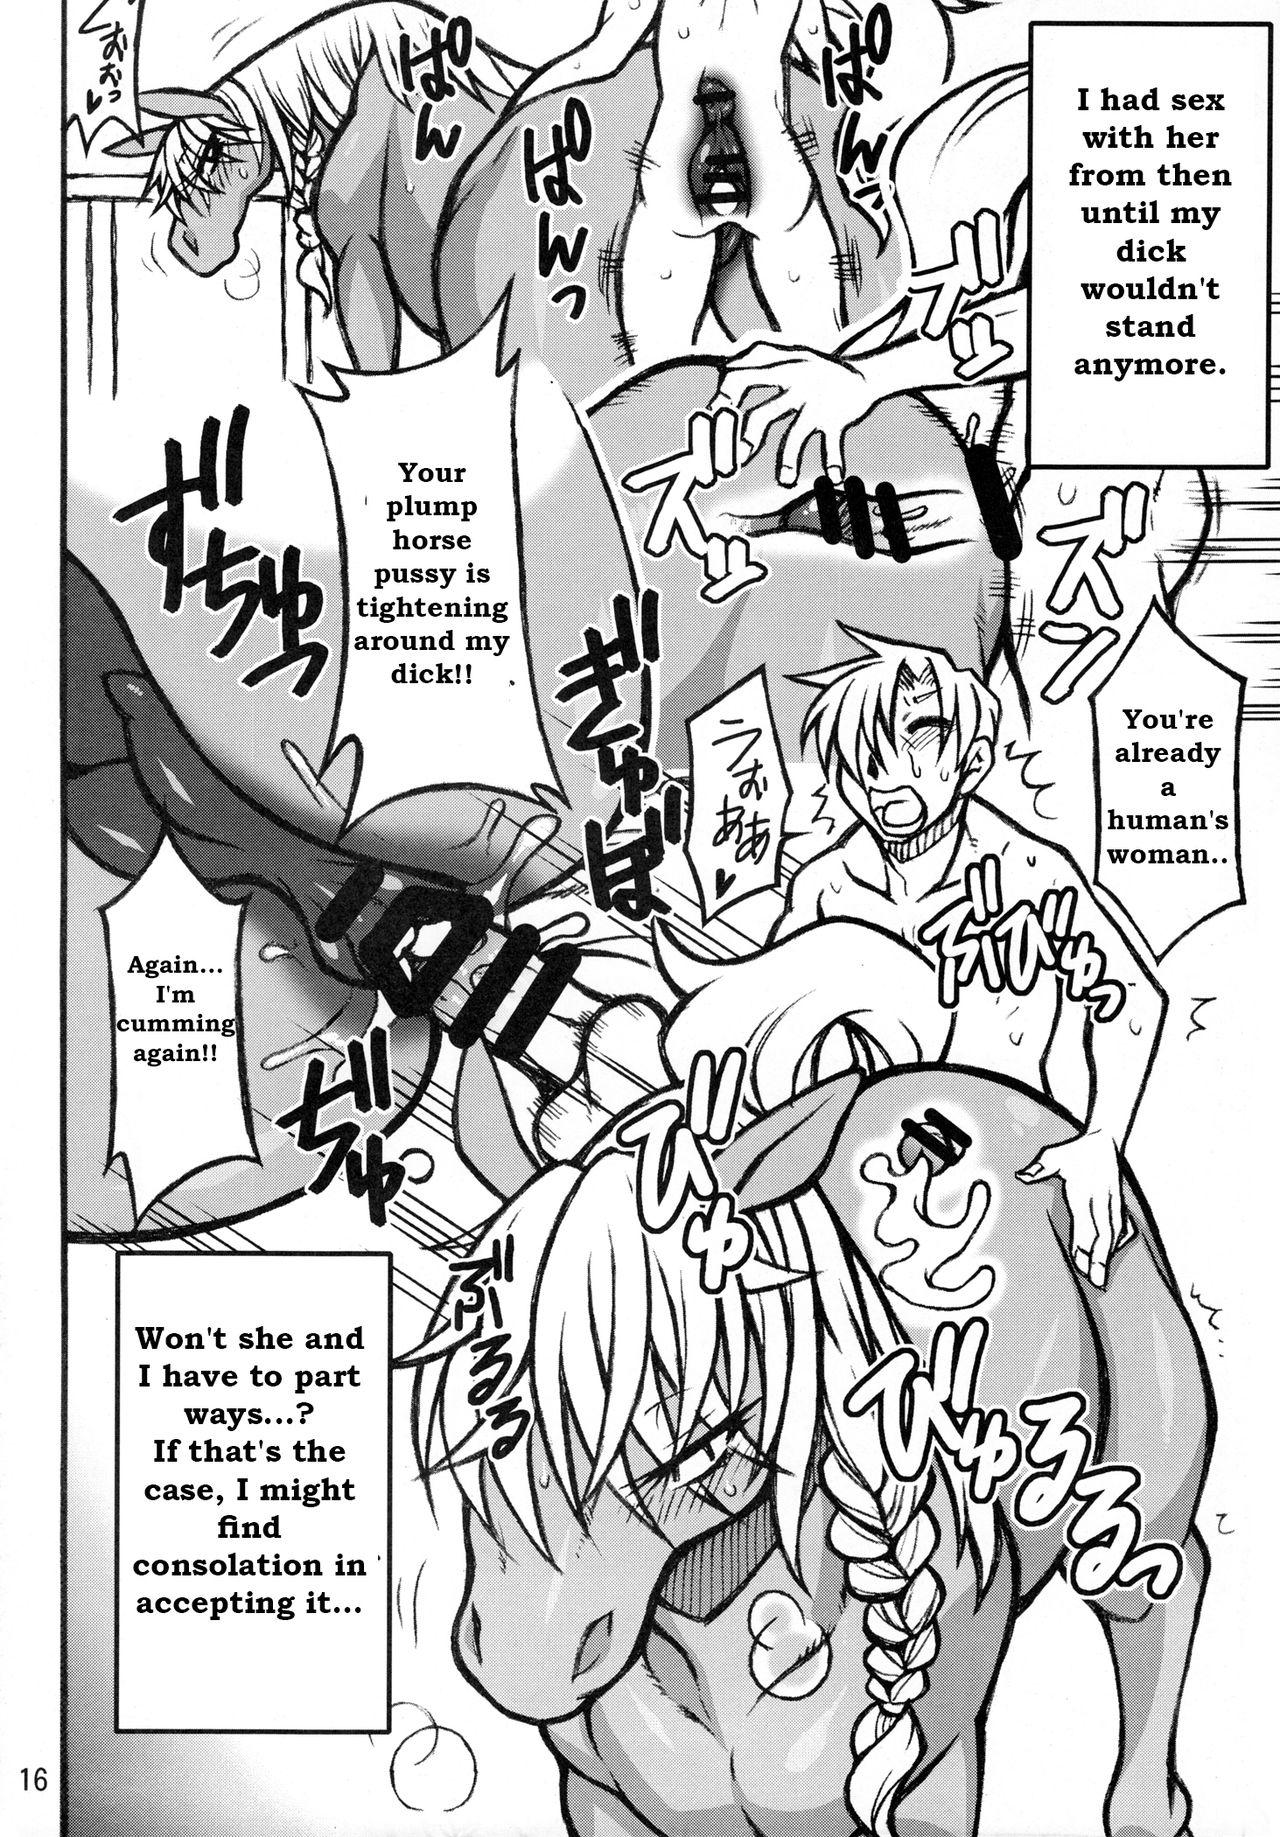 Family Mare Holic 2 Kemolover Ch 1, 2, 8, 13, 16 Girl Sucking Dick - Page 11